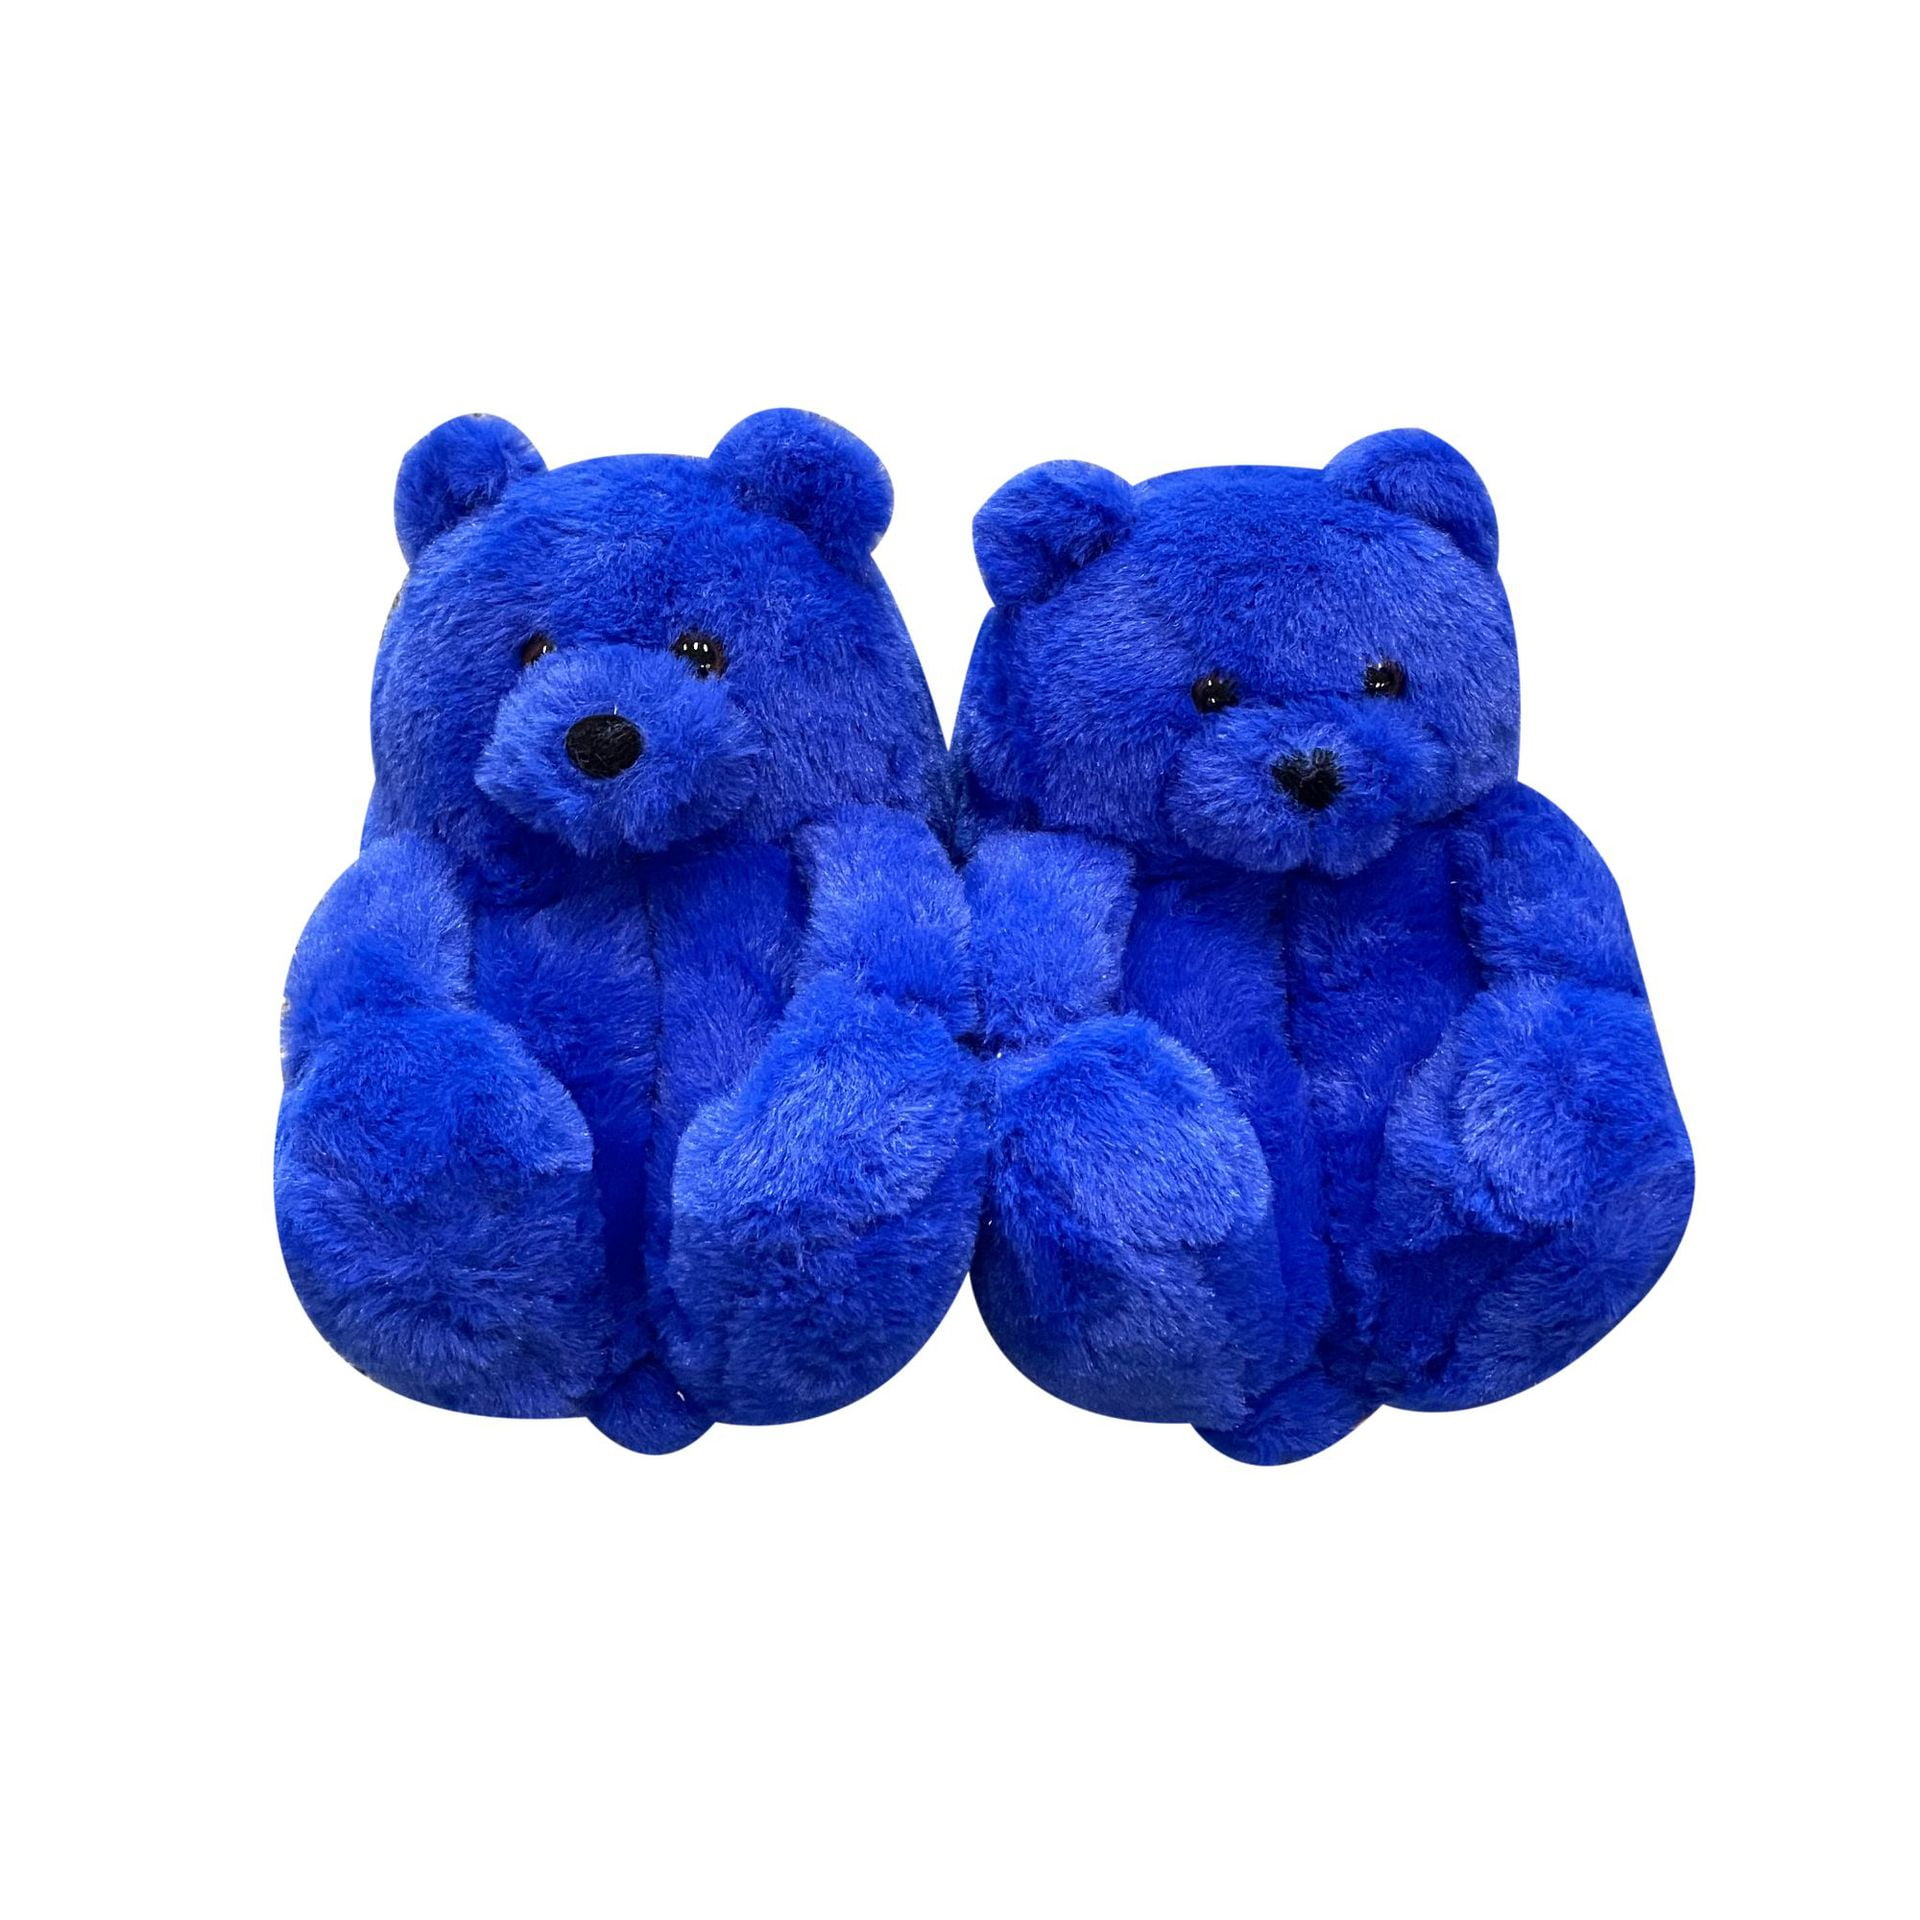 Teddy Bear Slippers, Soft Plush Animal Slippers Winter Warm Shoes -  